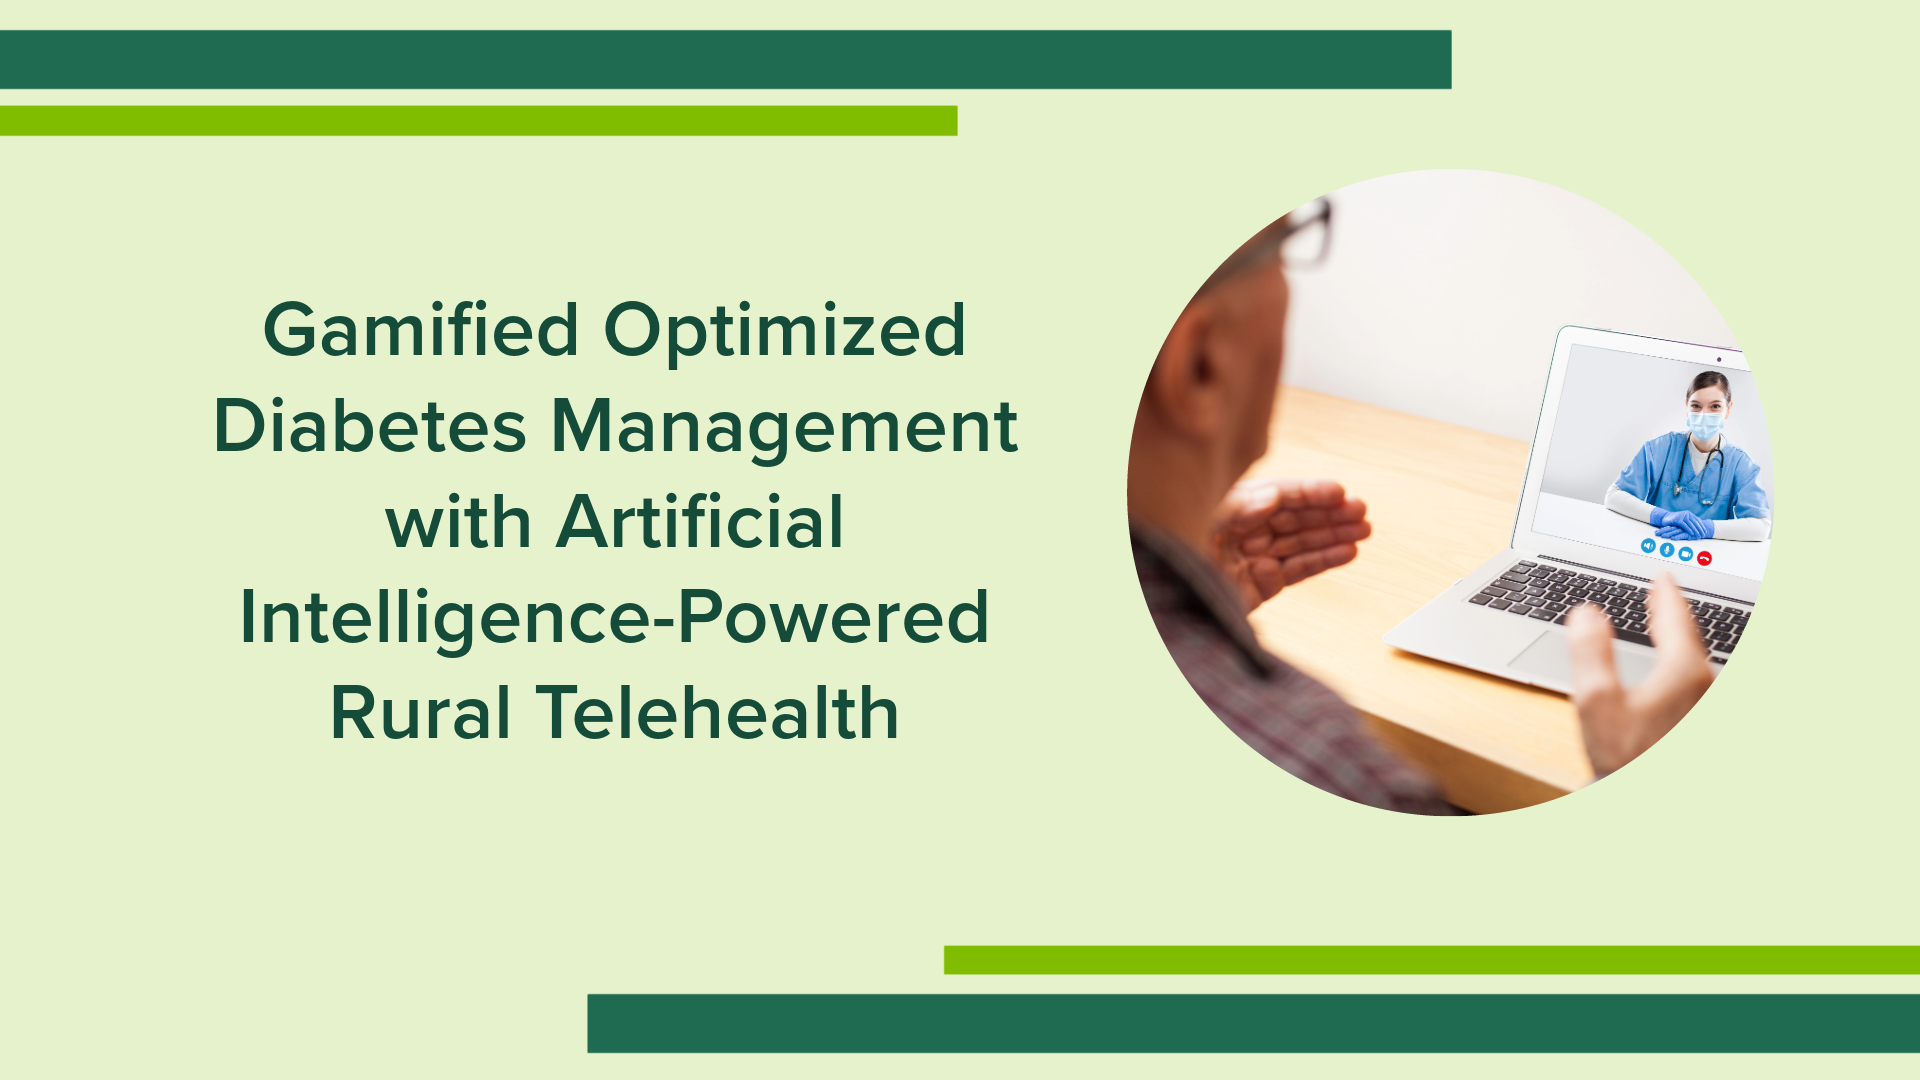 Gamified Optimized Diabetes Management With Artificial Intelligence-Powered Rural Telehealth (GODART)